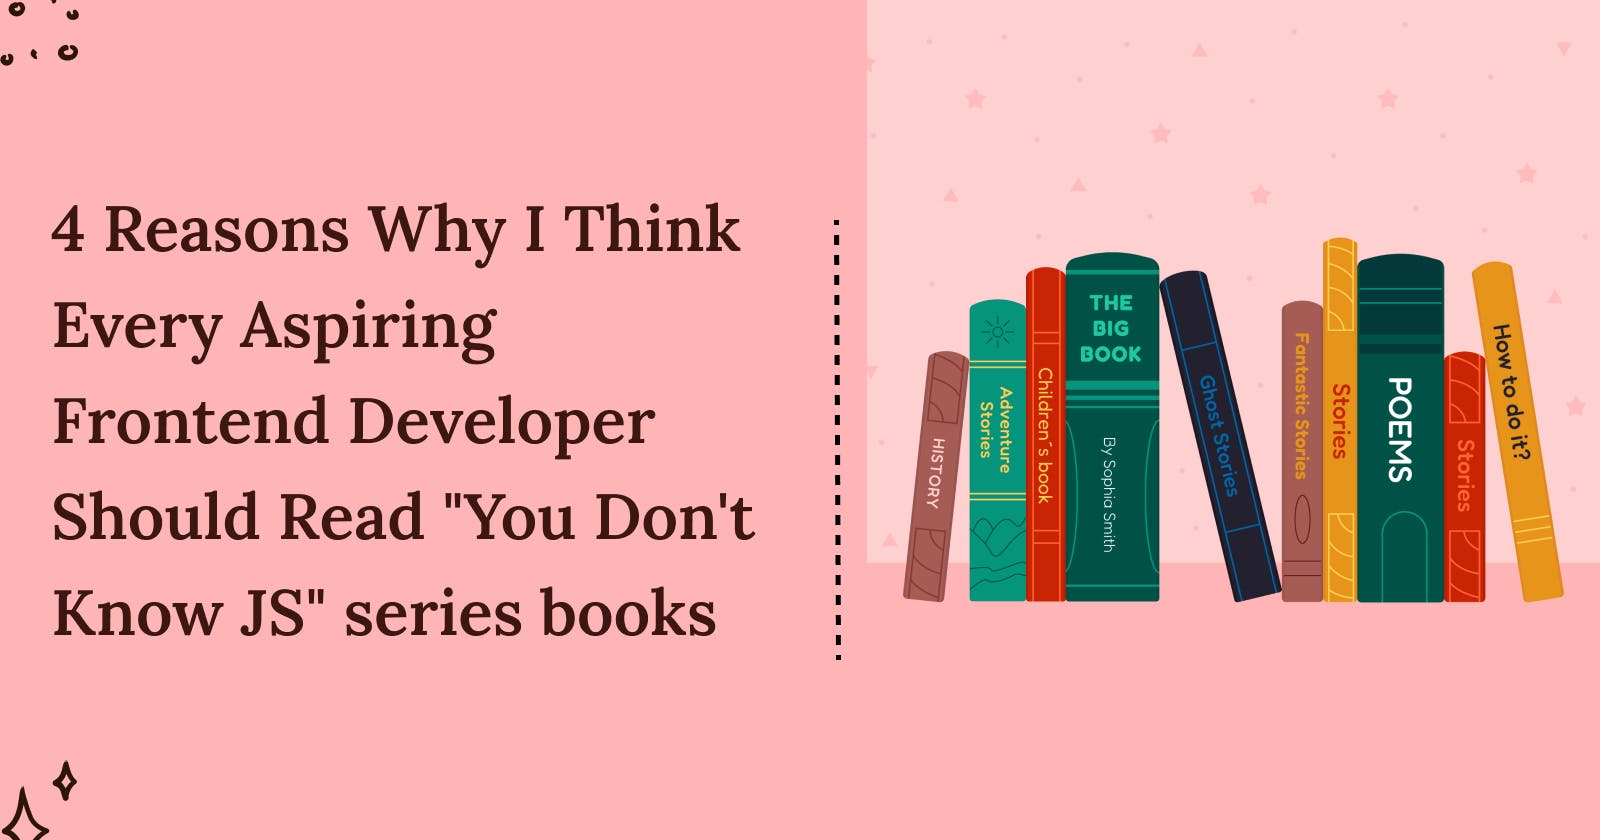 4 Reasons Why I Think Every Aspiring Frontend Developer Should Read "You Don't Know JS" book series✨📚